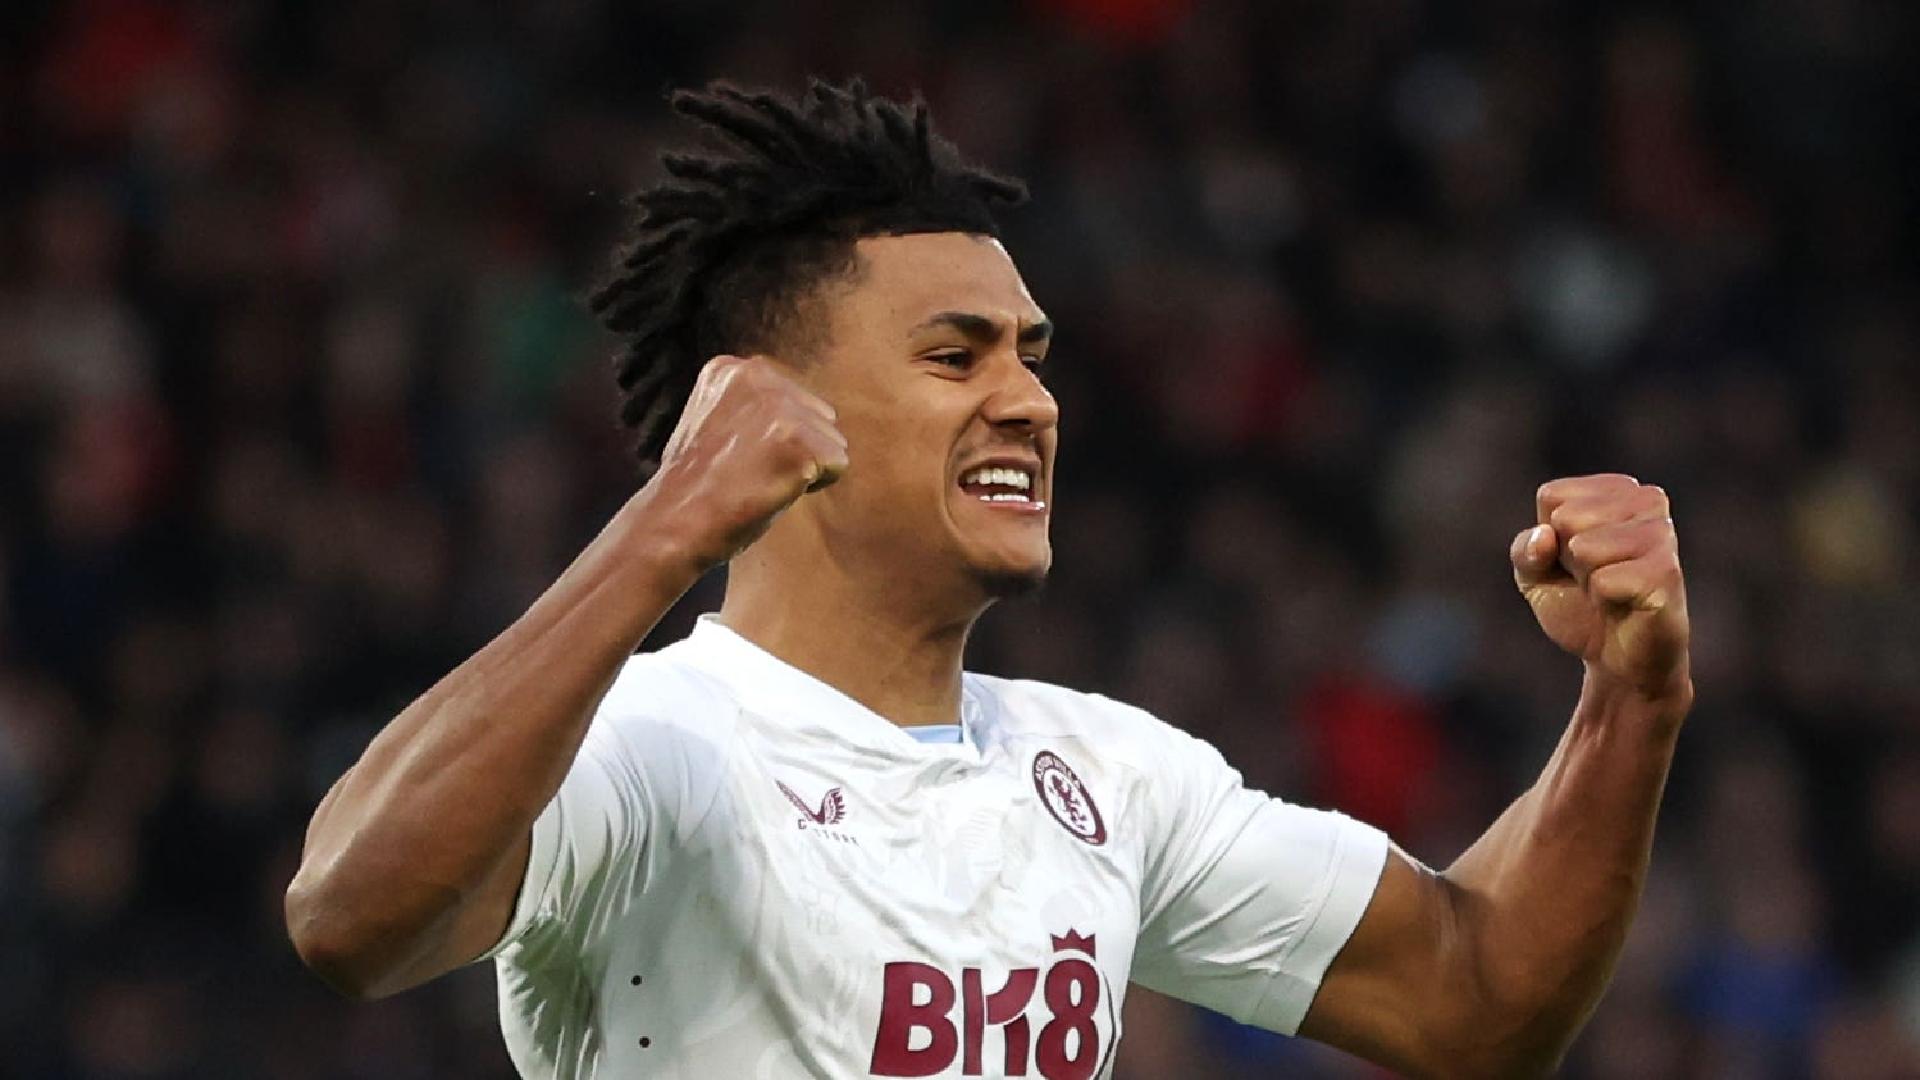 Unai Emery praises ‘strong’ Ollie Watkins after late equaliser at Bournemouth